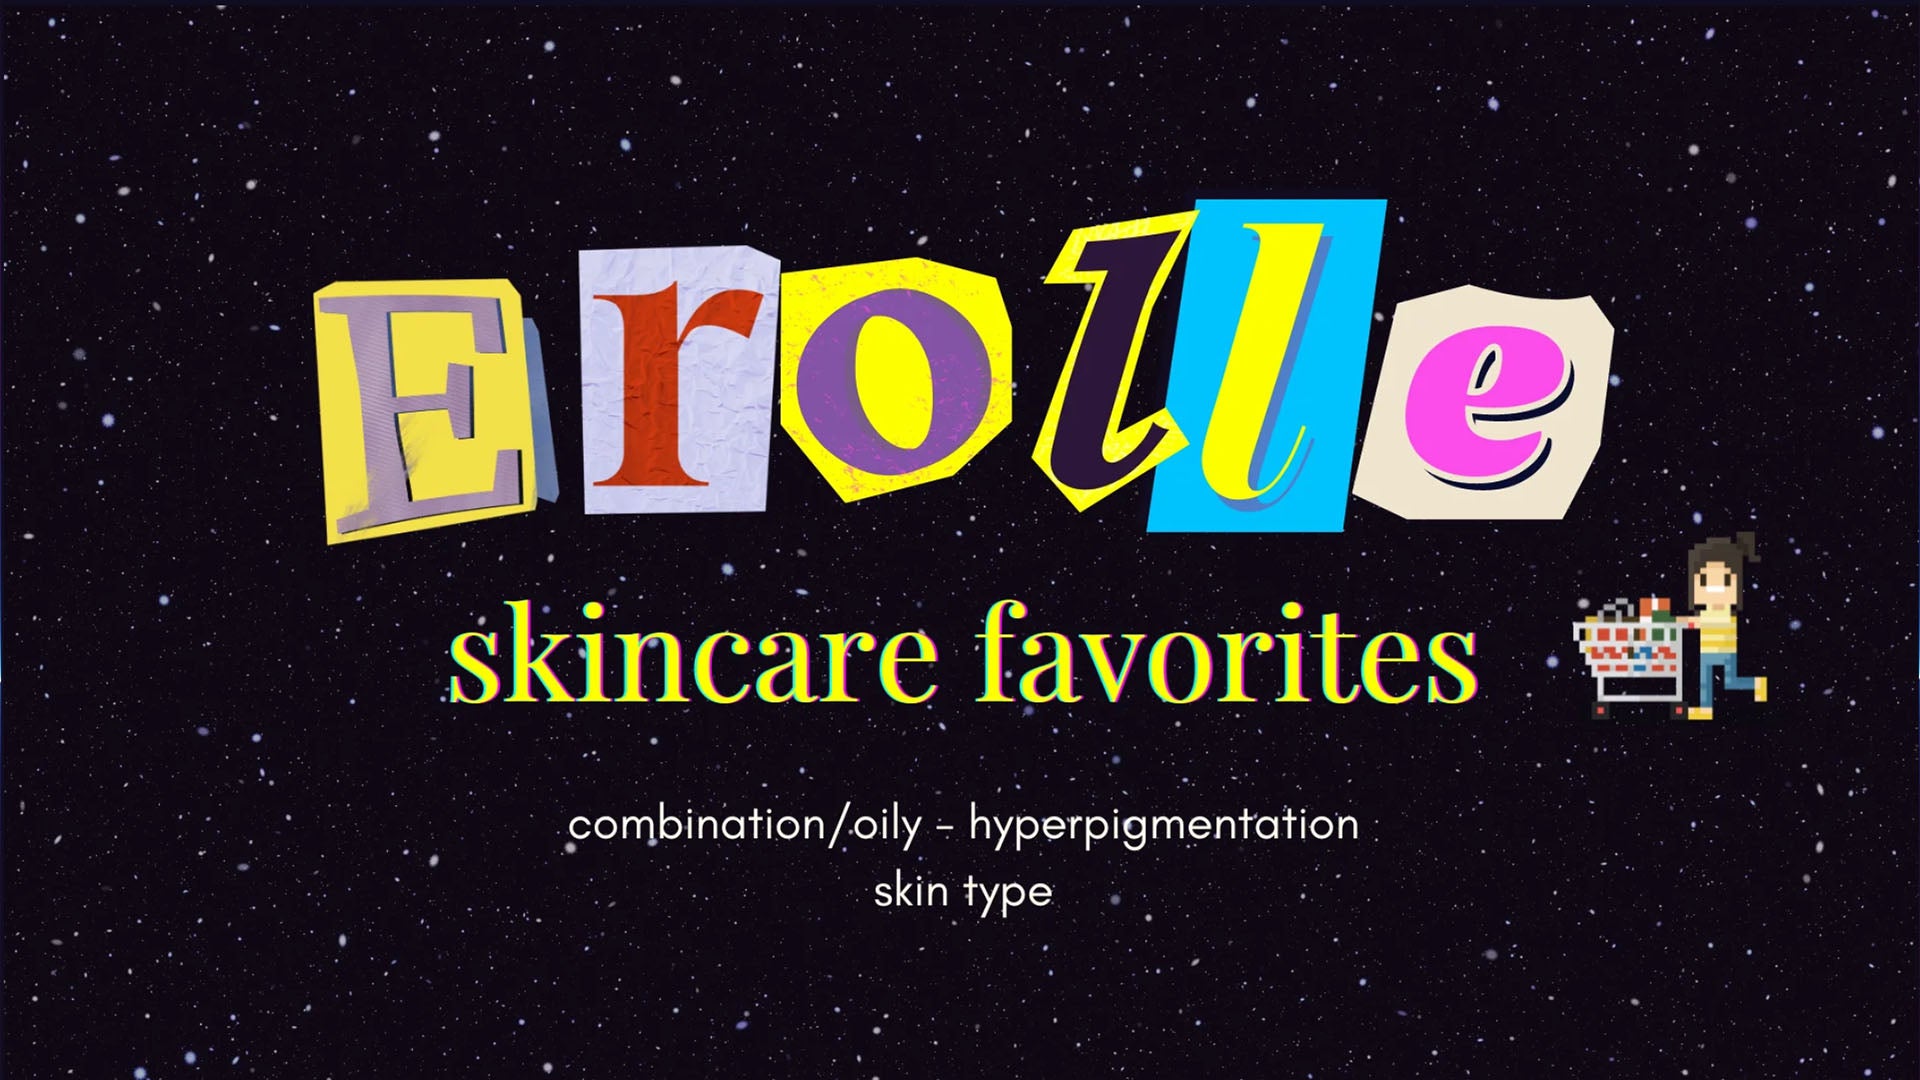 Master Combimation/Oily Skin & Hyperpigmentation with Erolle’s Must-Haves!